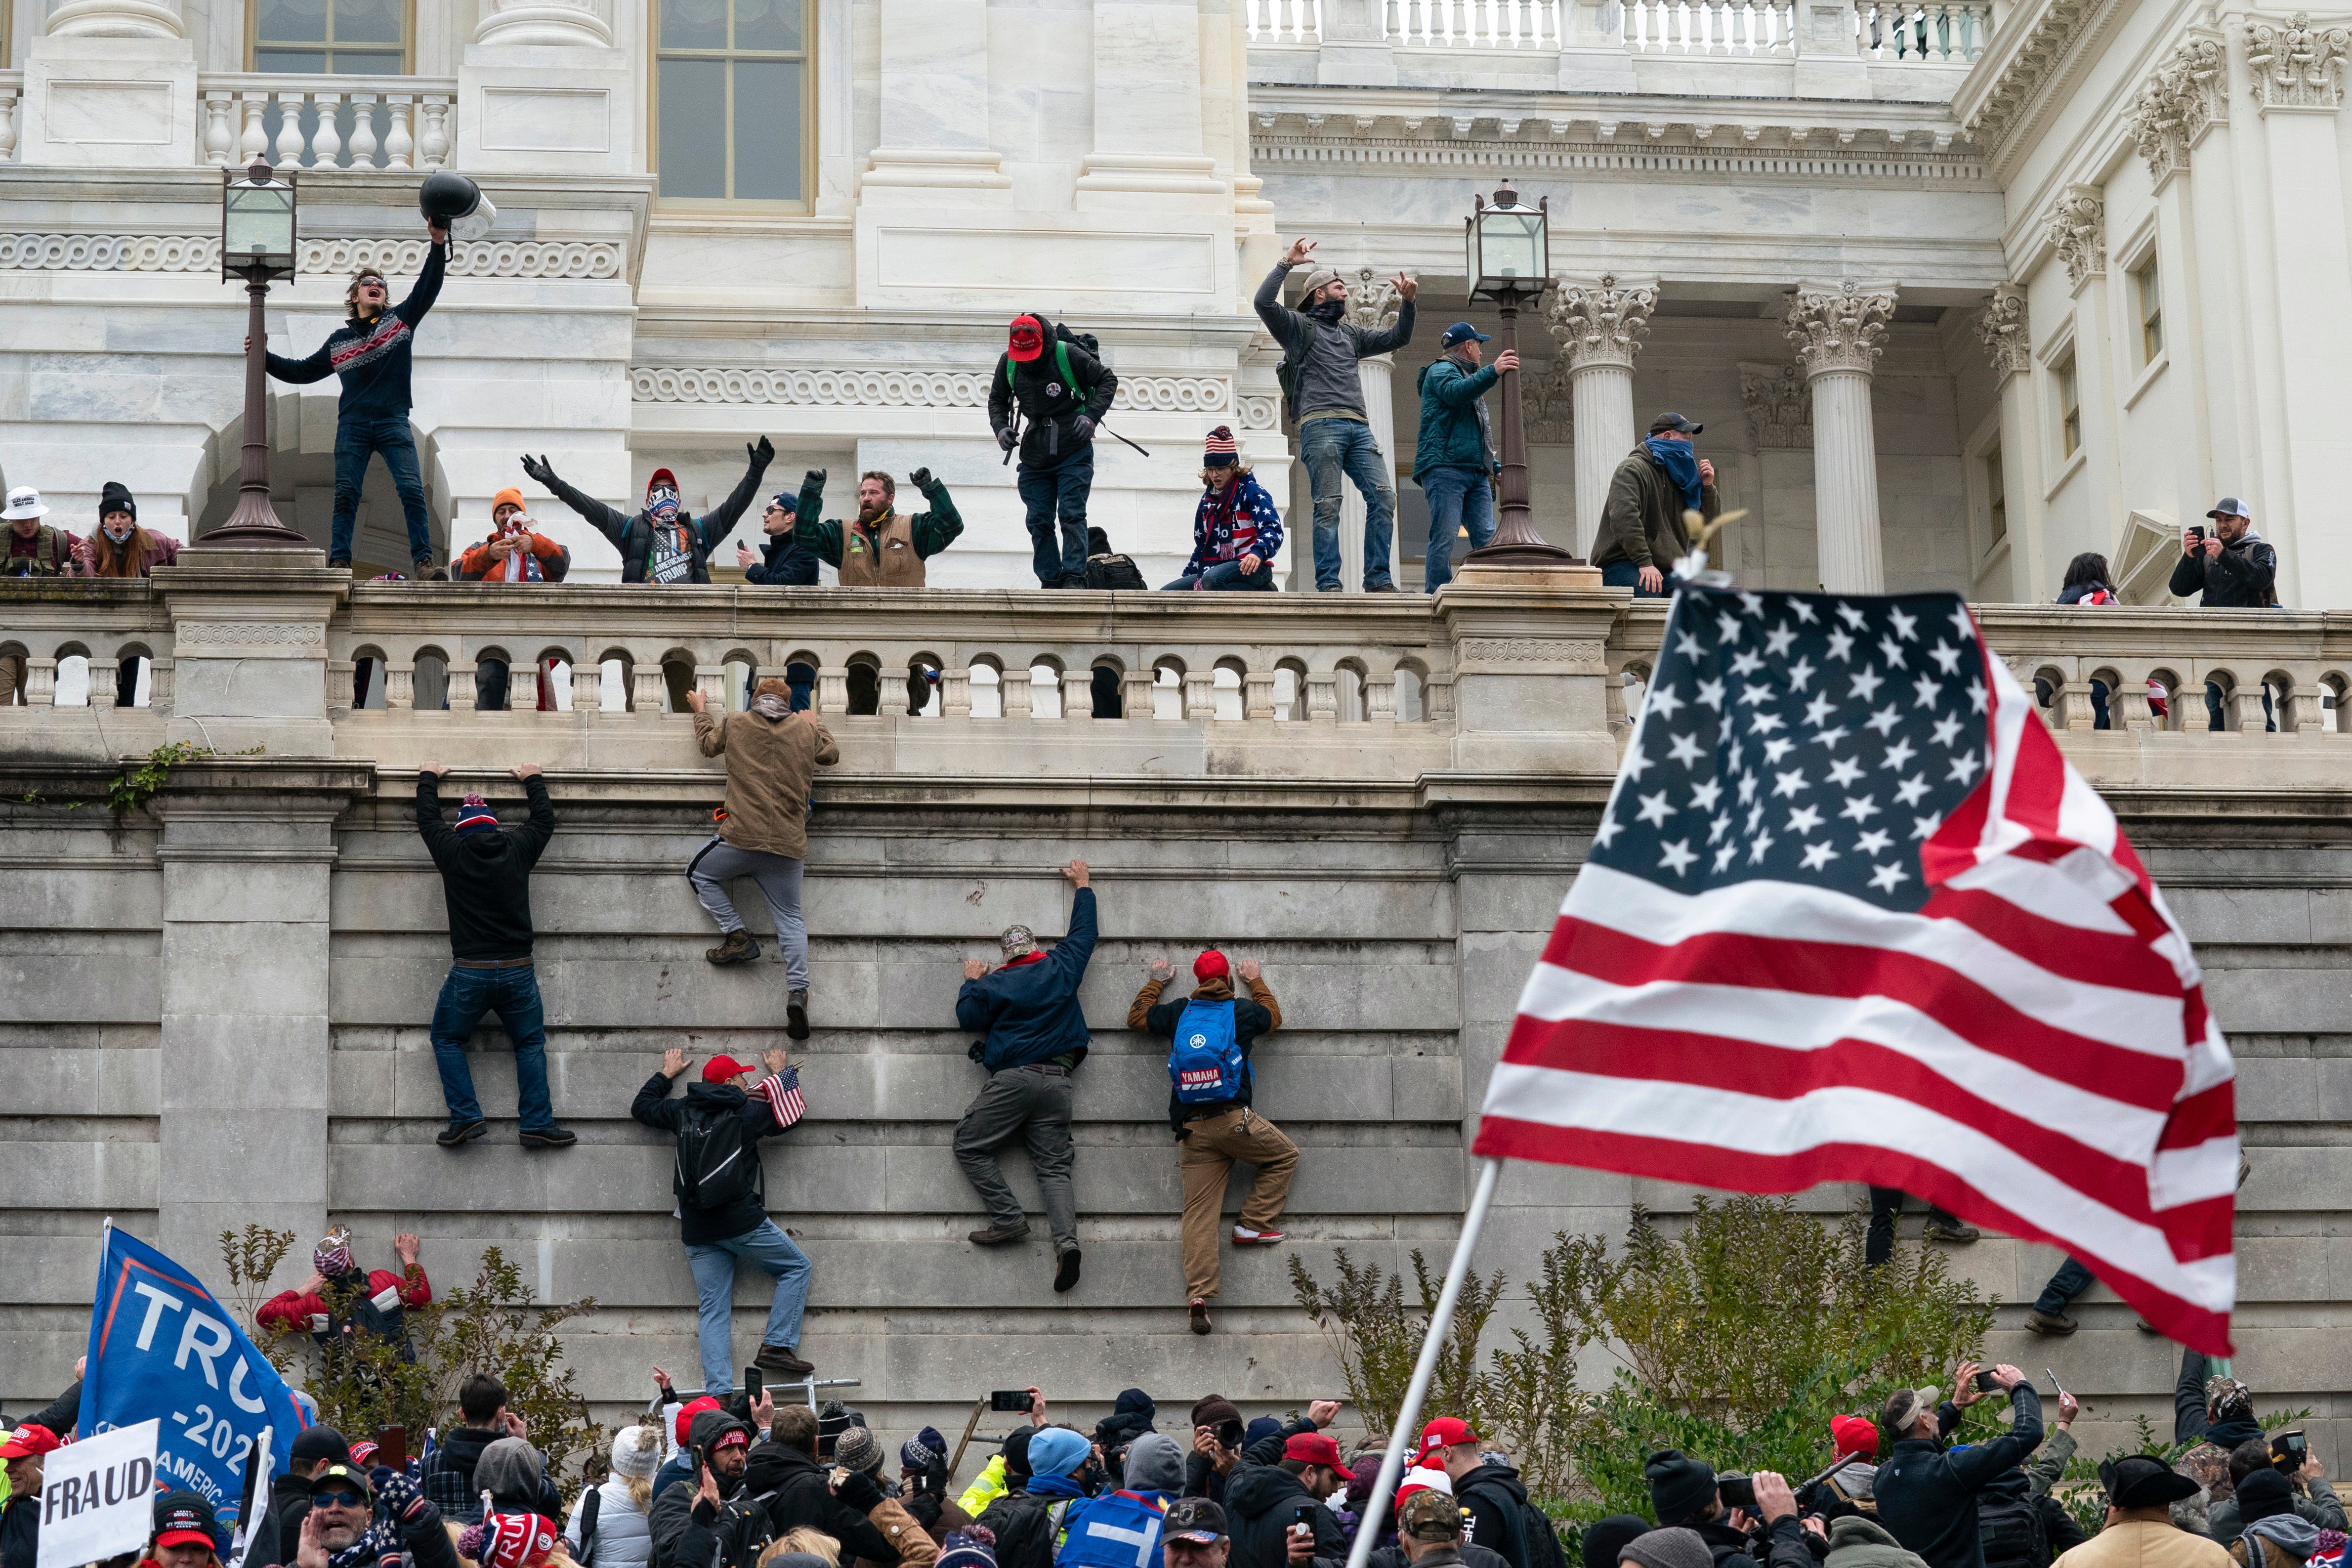 Rioters scale a wall at the US Capitol